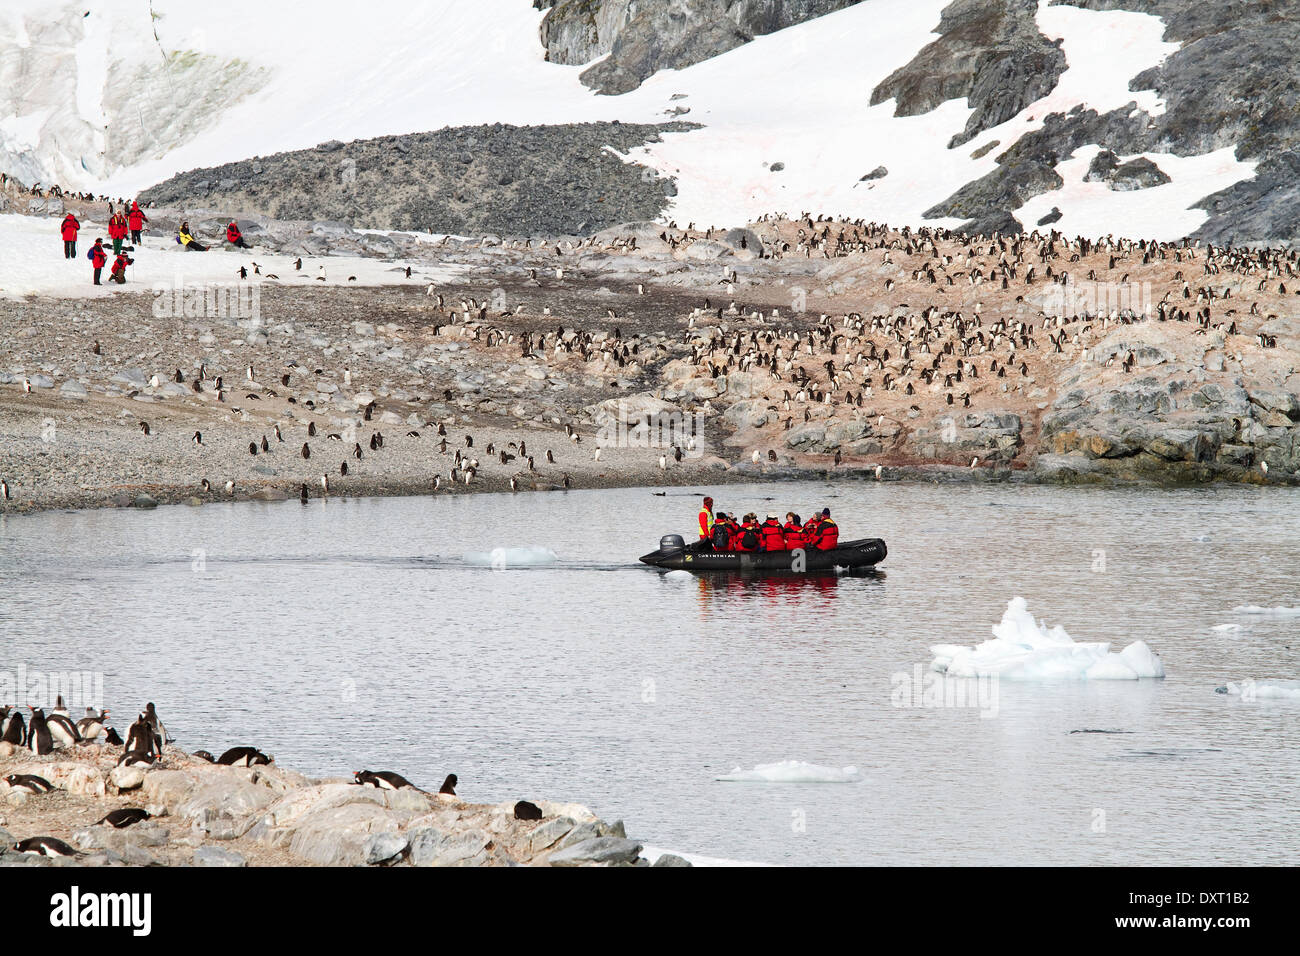 Antarctica tourism among the landscape of Antarctic iceberg, glacier, ice, and penguin with tourists in zodiacs. Stock Photo